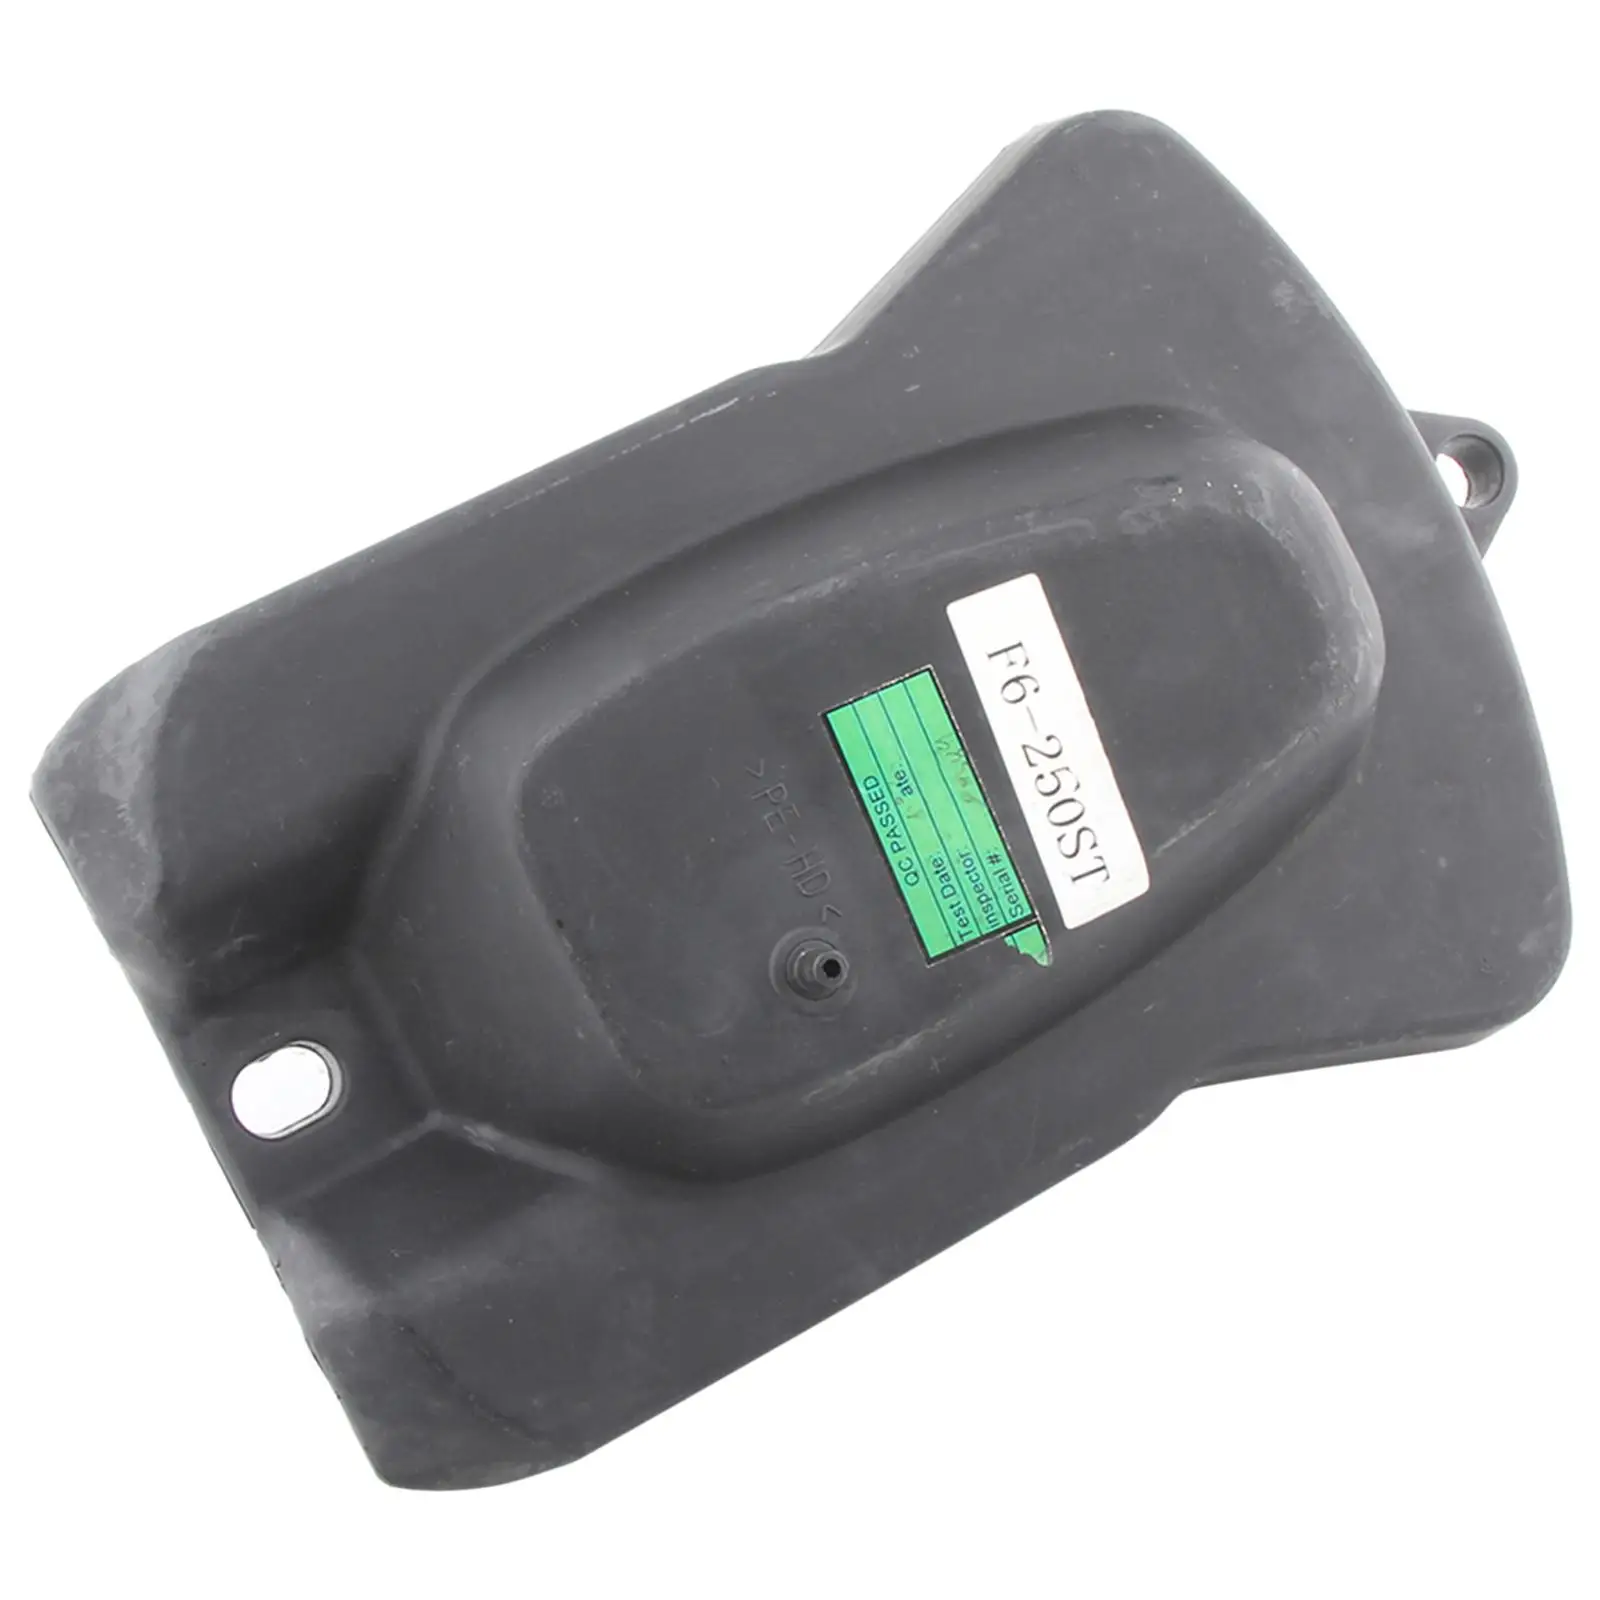 Fuel Petrol Tank, Bbr Style Fit for Kawasaki 70 90 110 140cc Motocross Motorcycle Replace